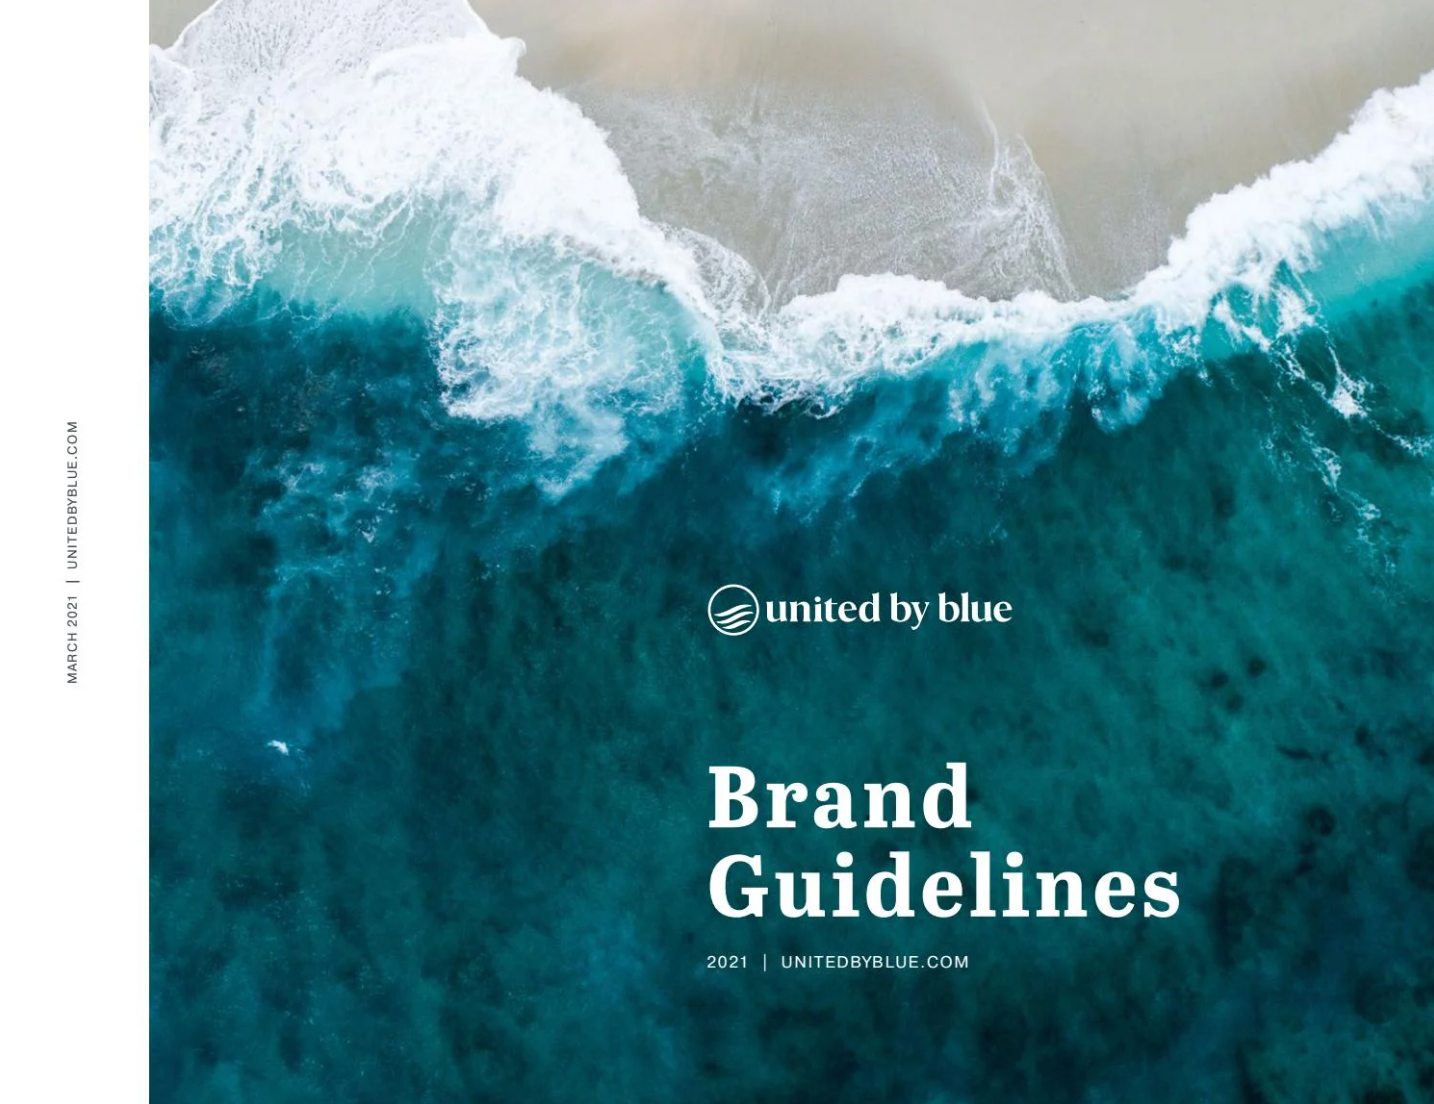 United by Blue brand guidelines